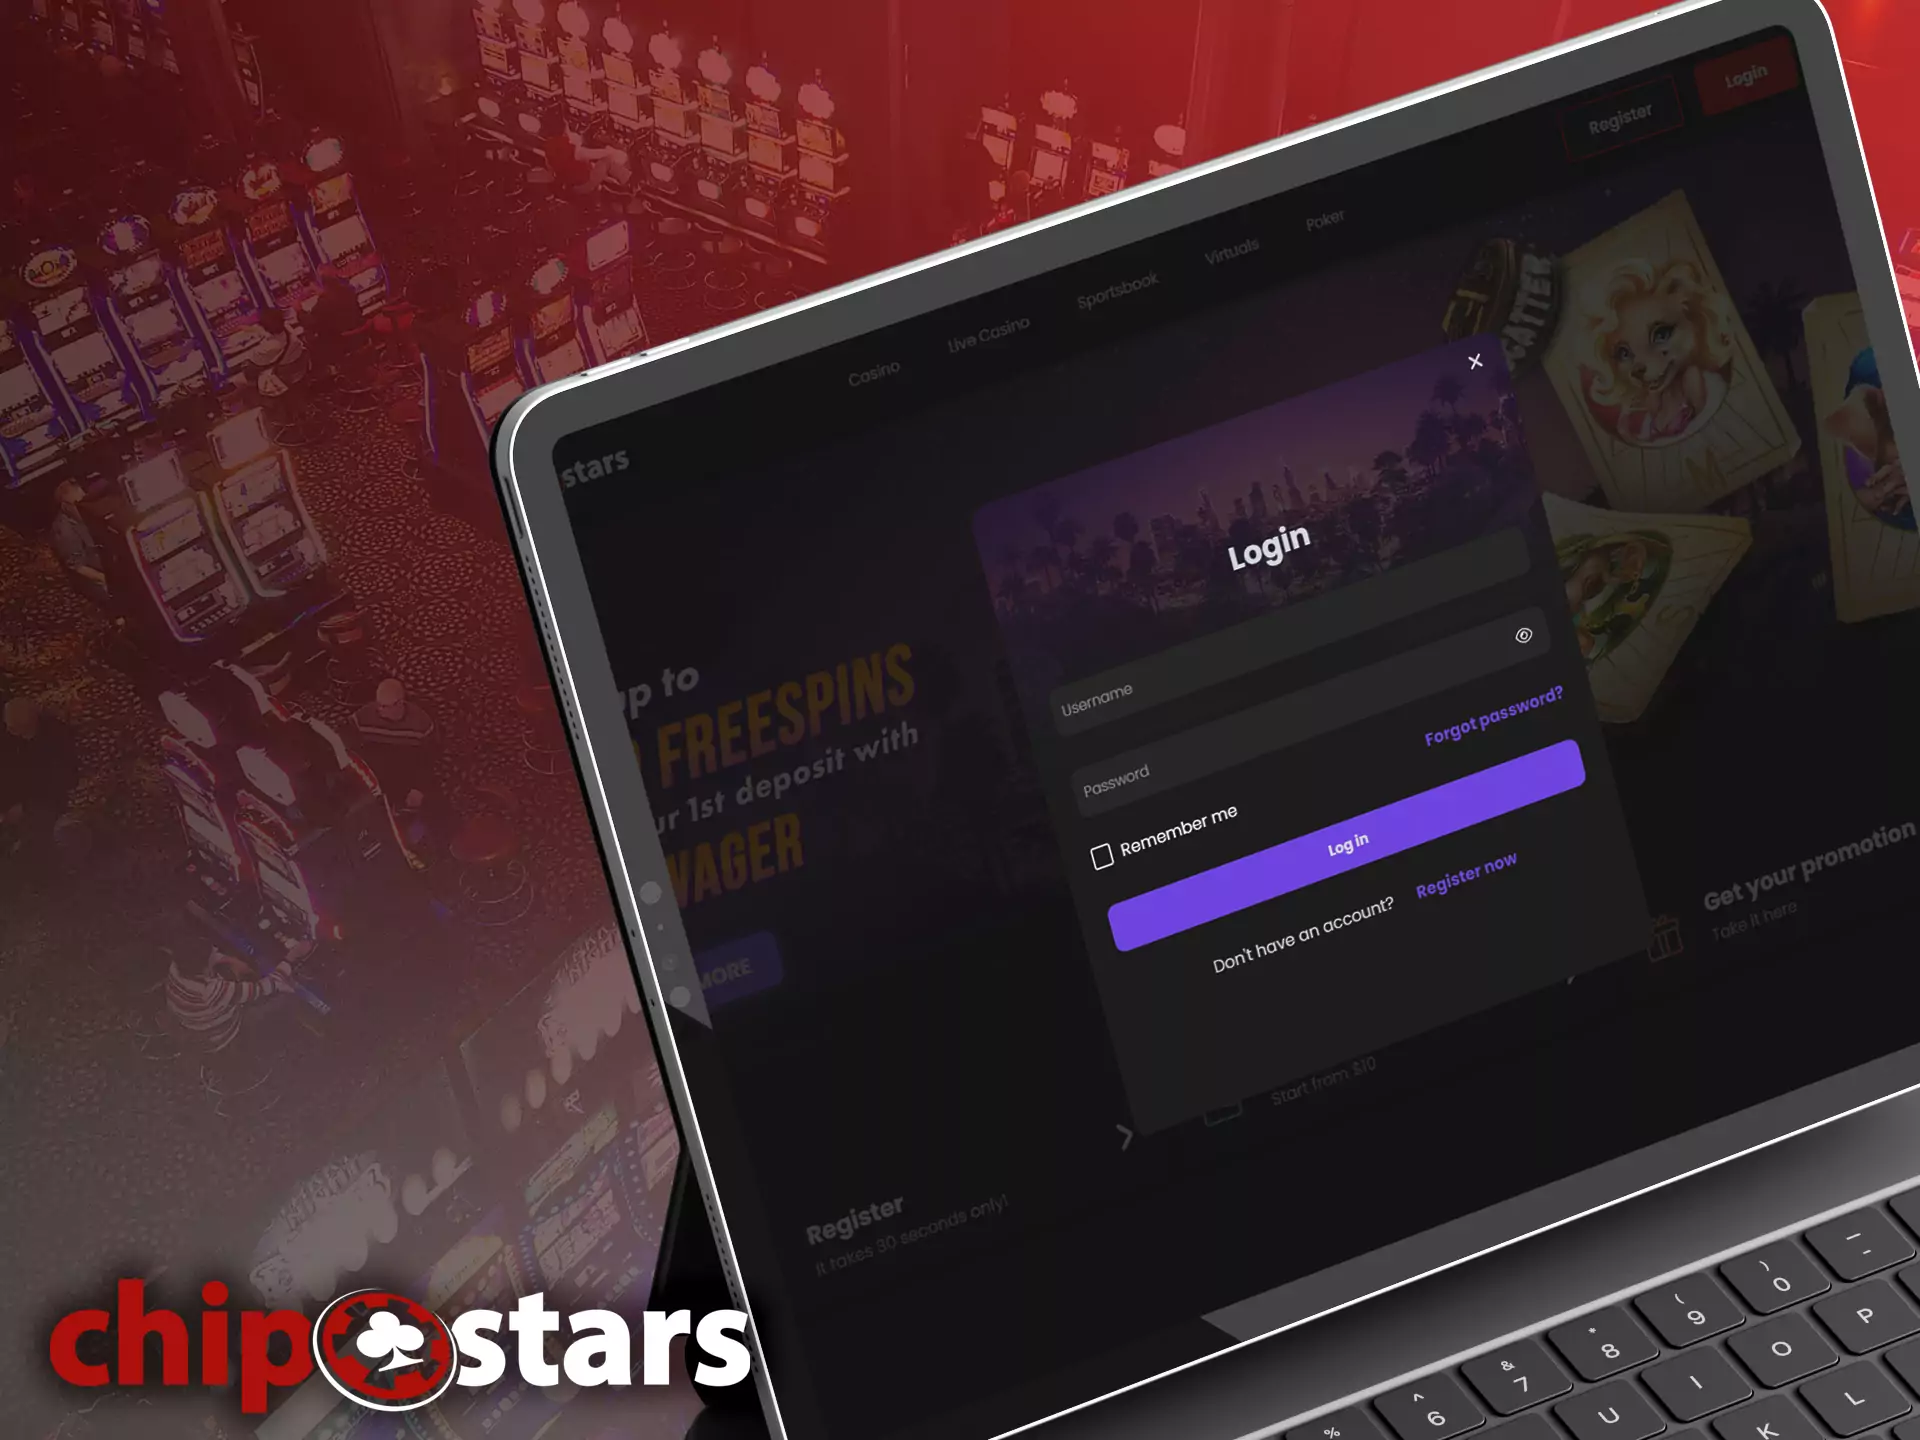 To start betting, you need to log into the Chipstars account.